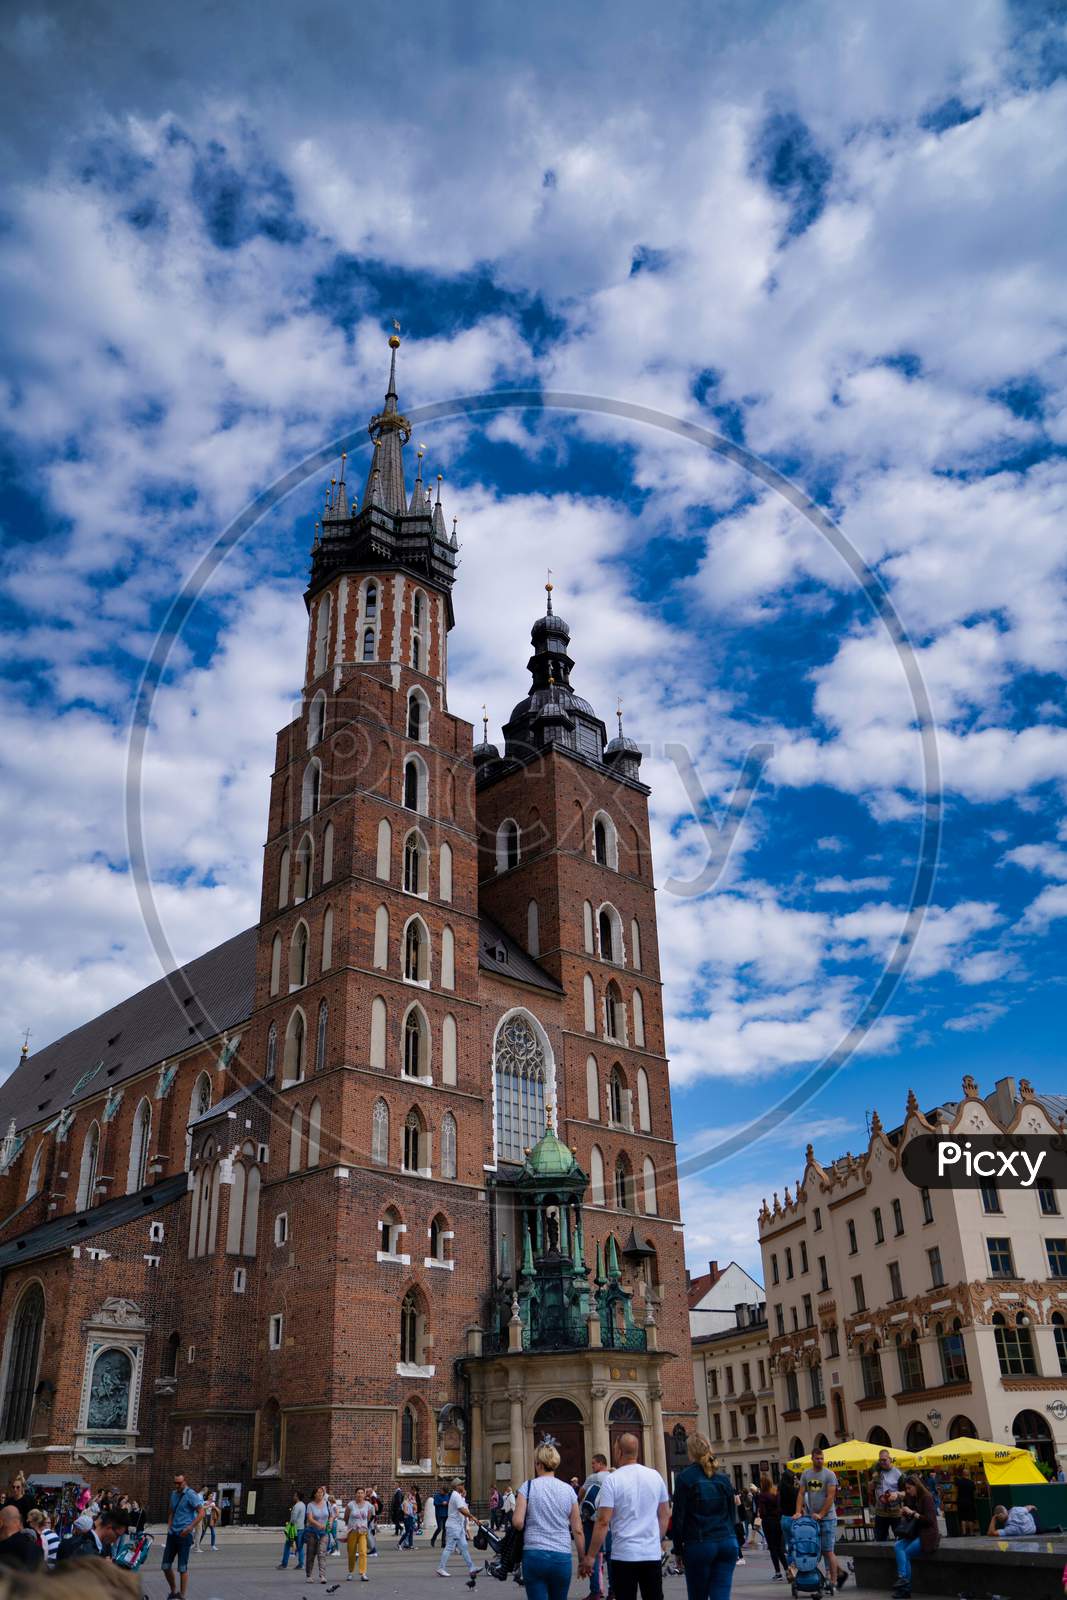 Krakow, Poland - July 12, 2020: Vertical Shot Of Saint Mary’S Basilica Is A Brick Gothic Church Adjacent To The Main Market Square Against Dramatic Cloudy Blue Sky